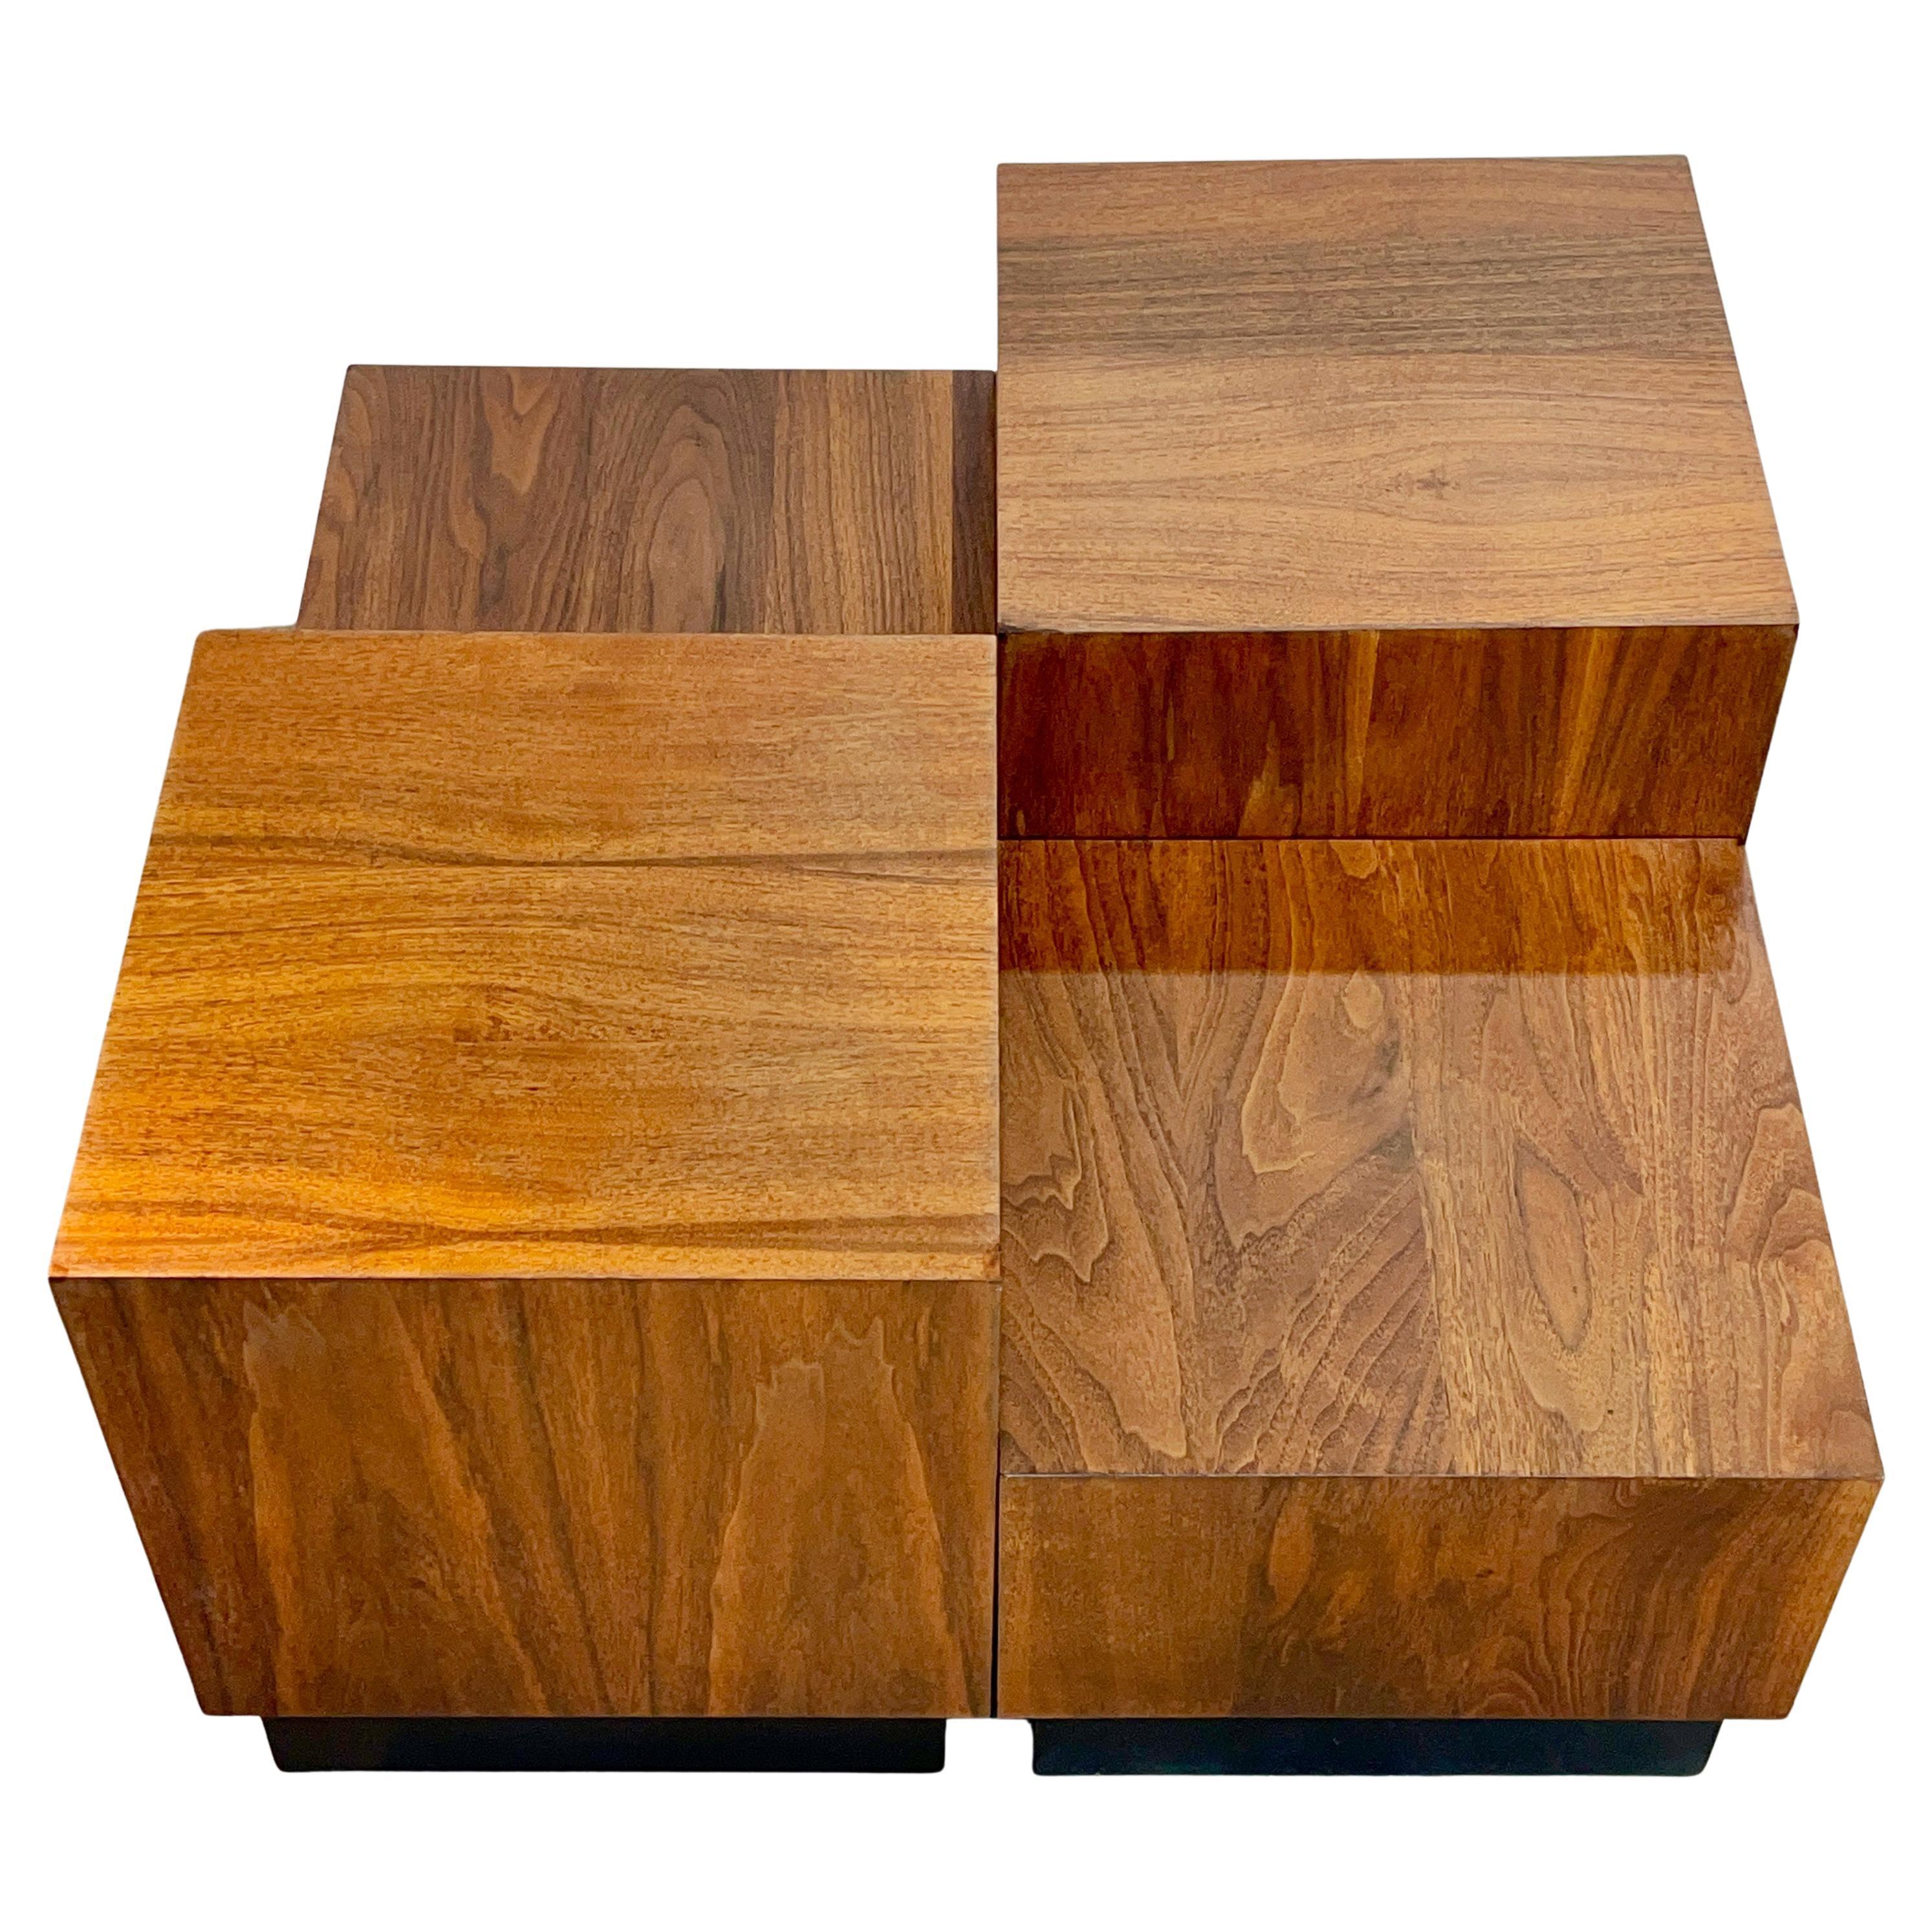 Set of four walnut veneered cube tables on black recessed plinth bases designed by Adrian Pearsall and produced by Craft Associates in 1969.
Can be used clustered together as a cocktail table, side tables, end tables or as pedestals for displaying